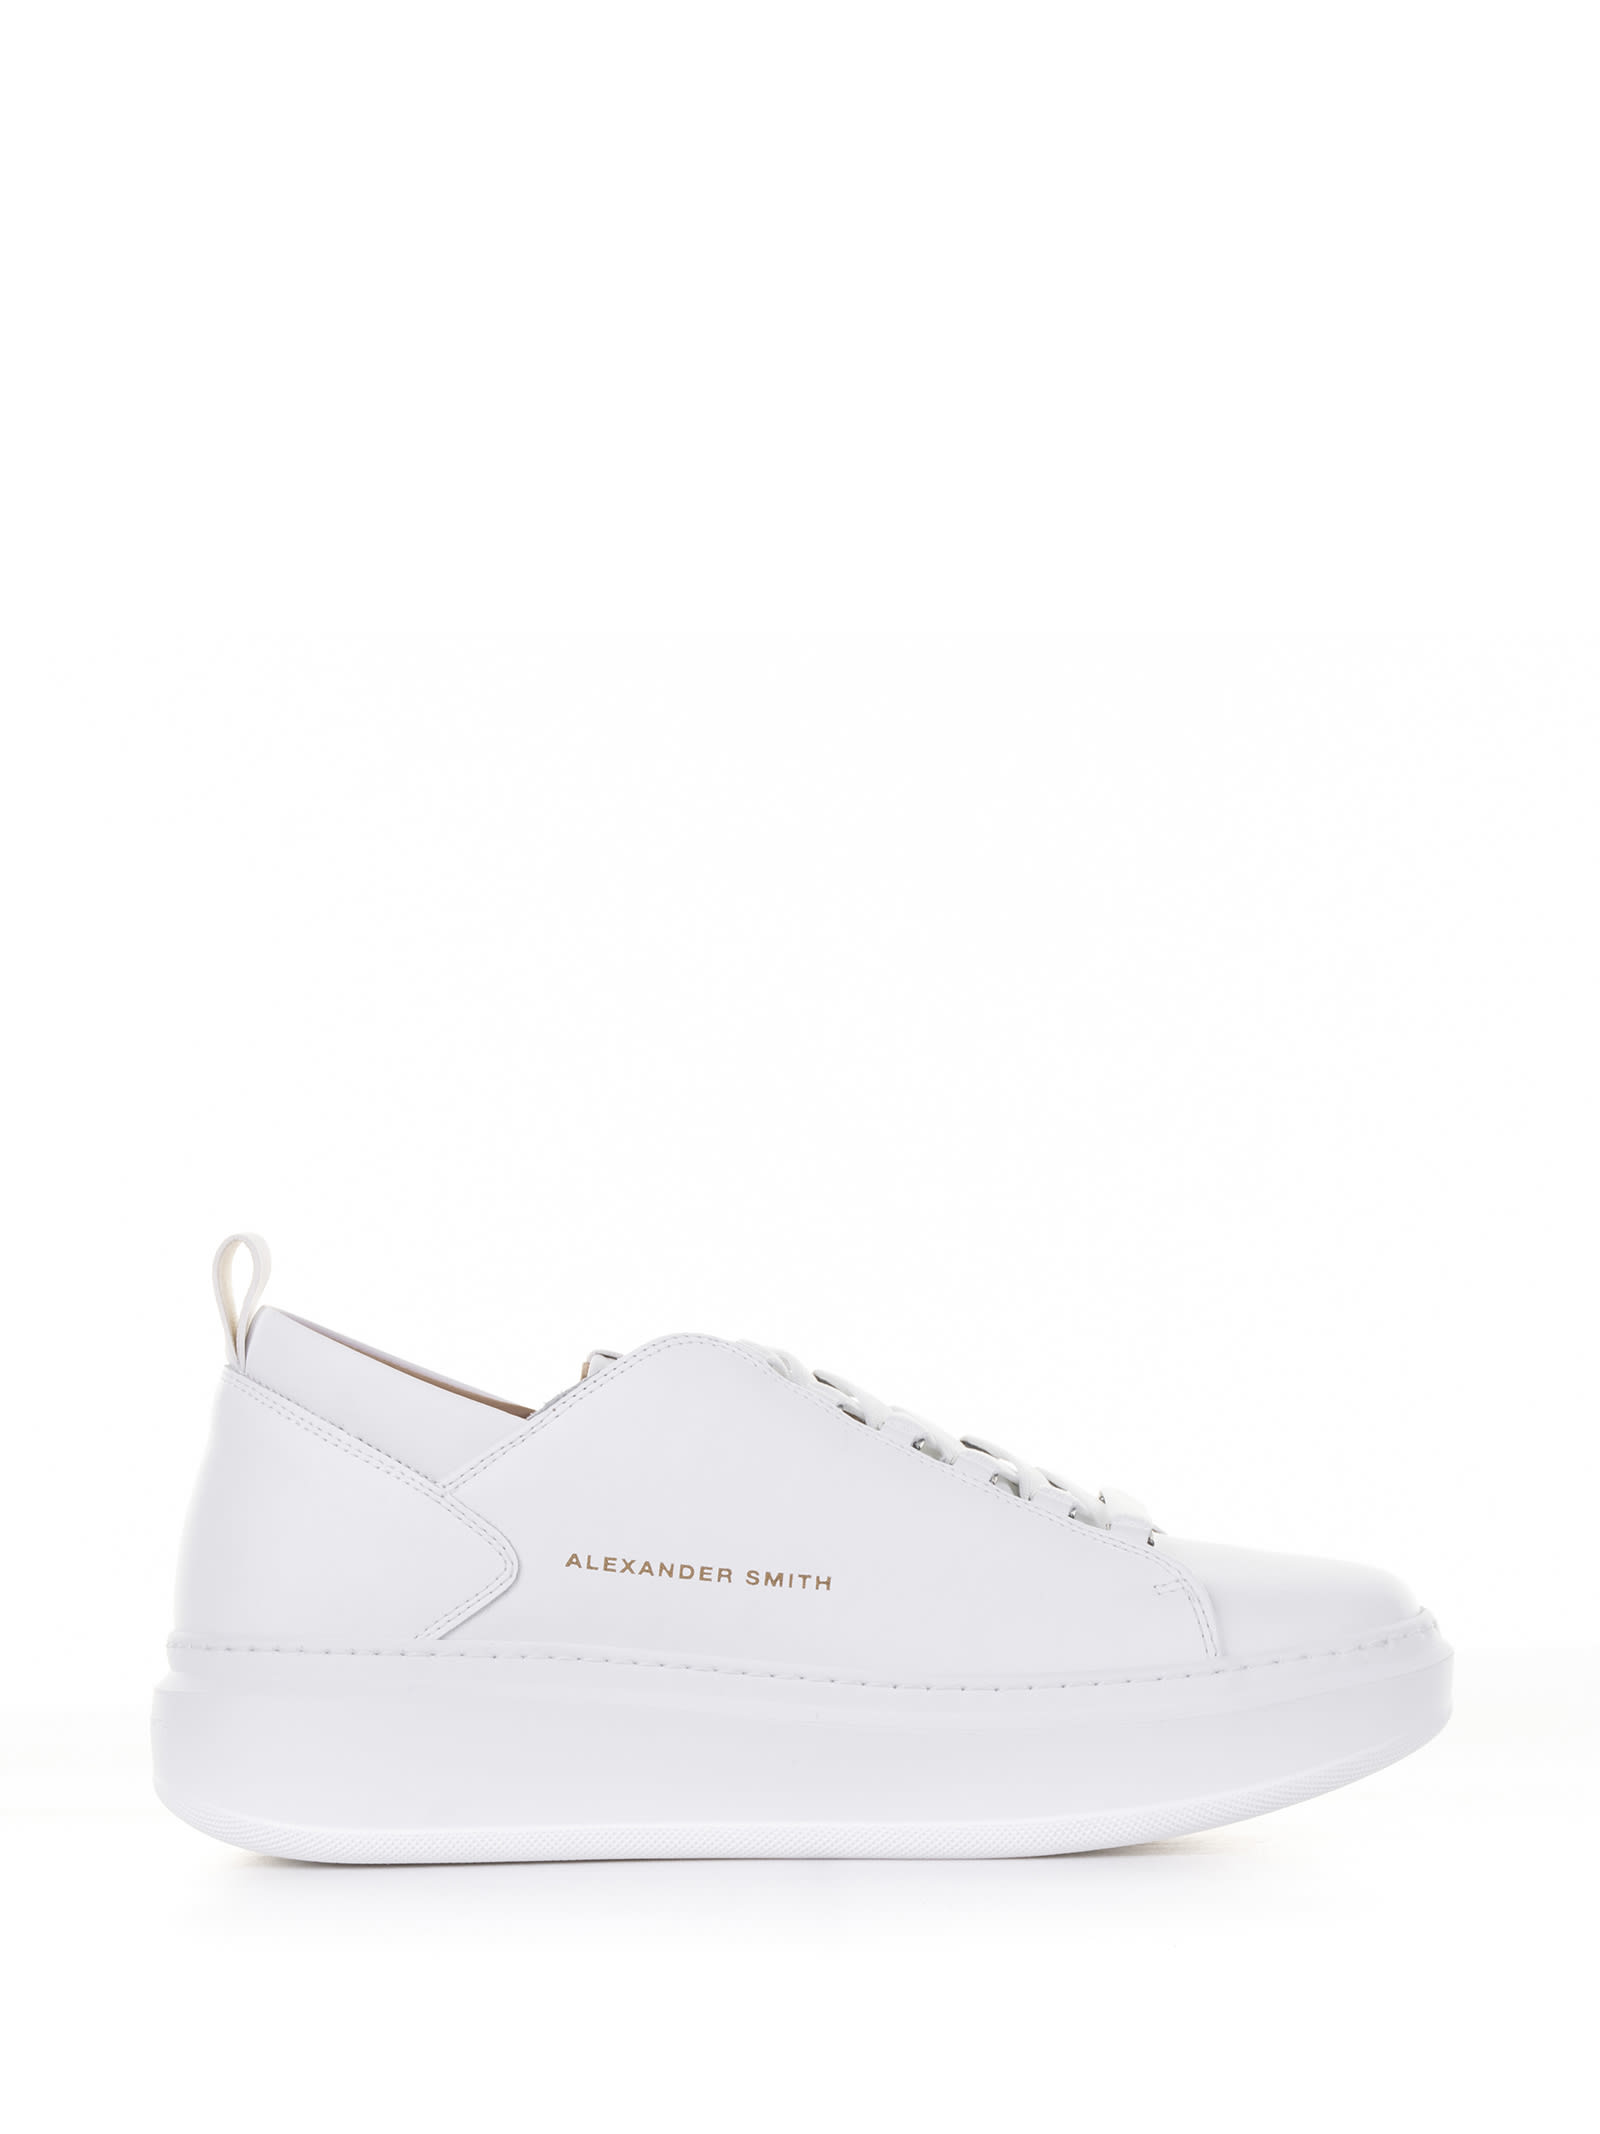 Alexander Smith White Wembley Leather Sneaker